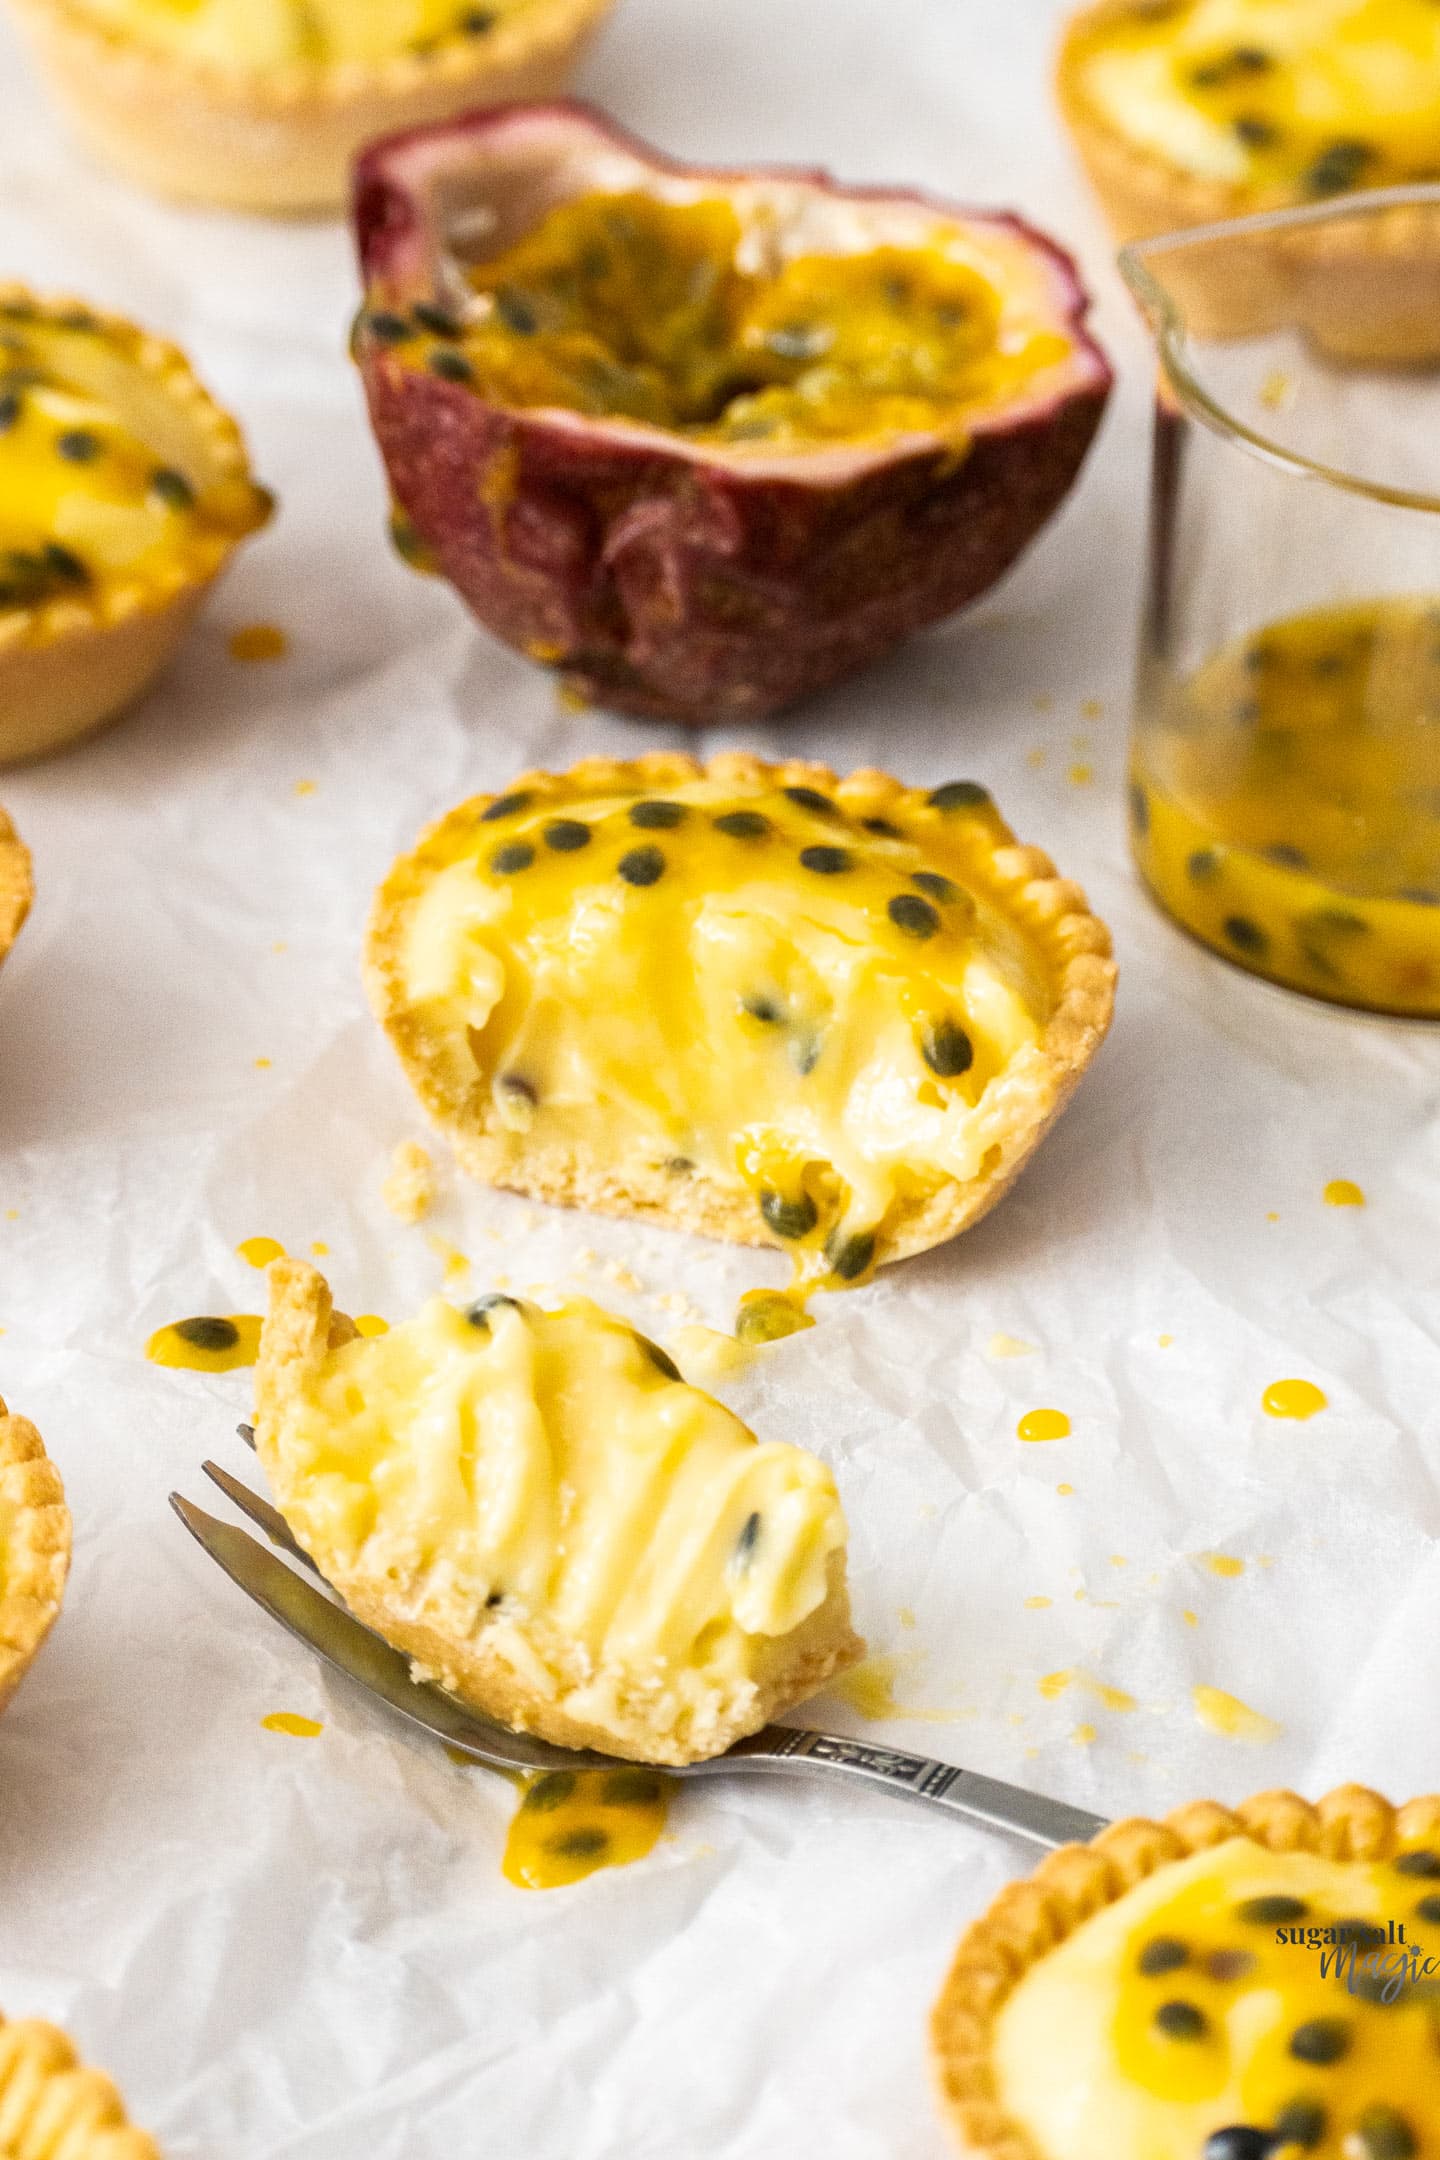 A passionfruit tartlet with part of it cut away showing the texture.